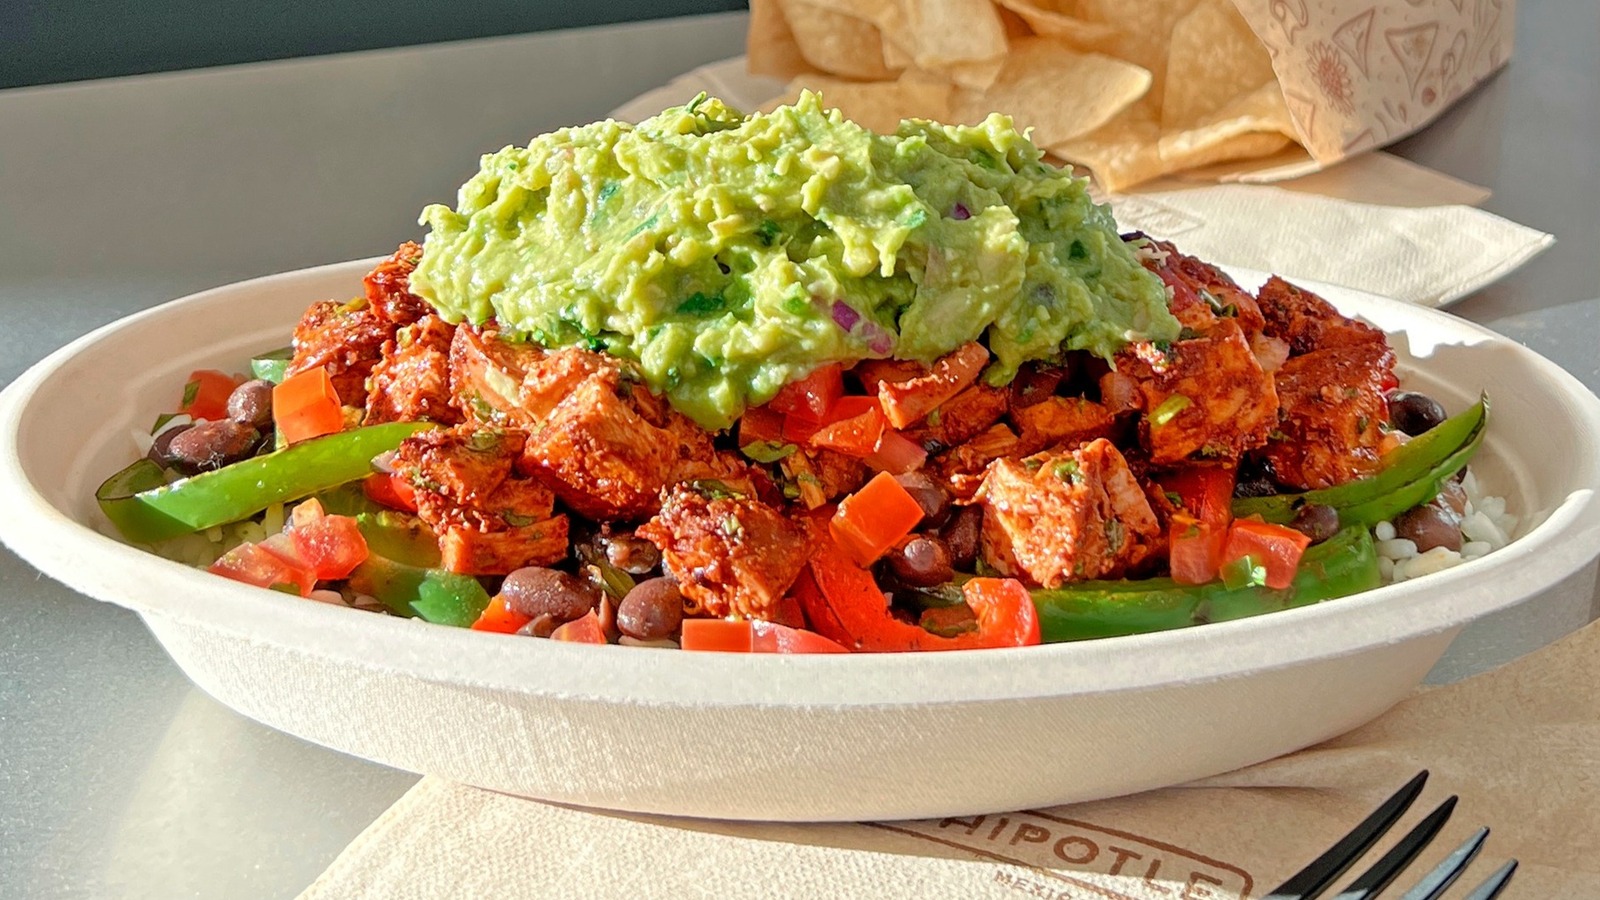 The Chipotle Ordering Hack That Could Get You Way Bigger Portions